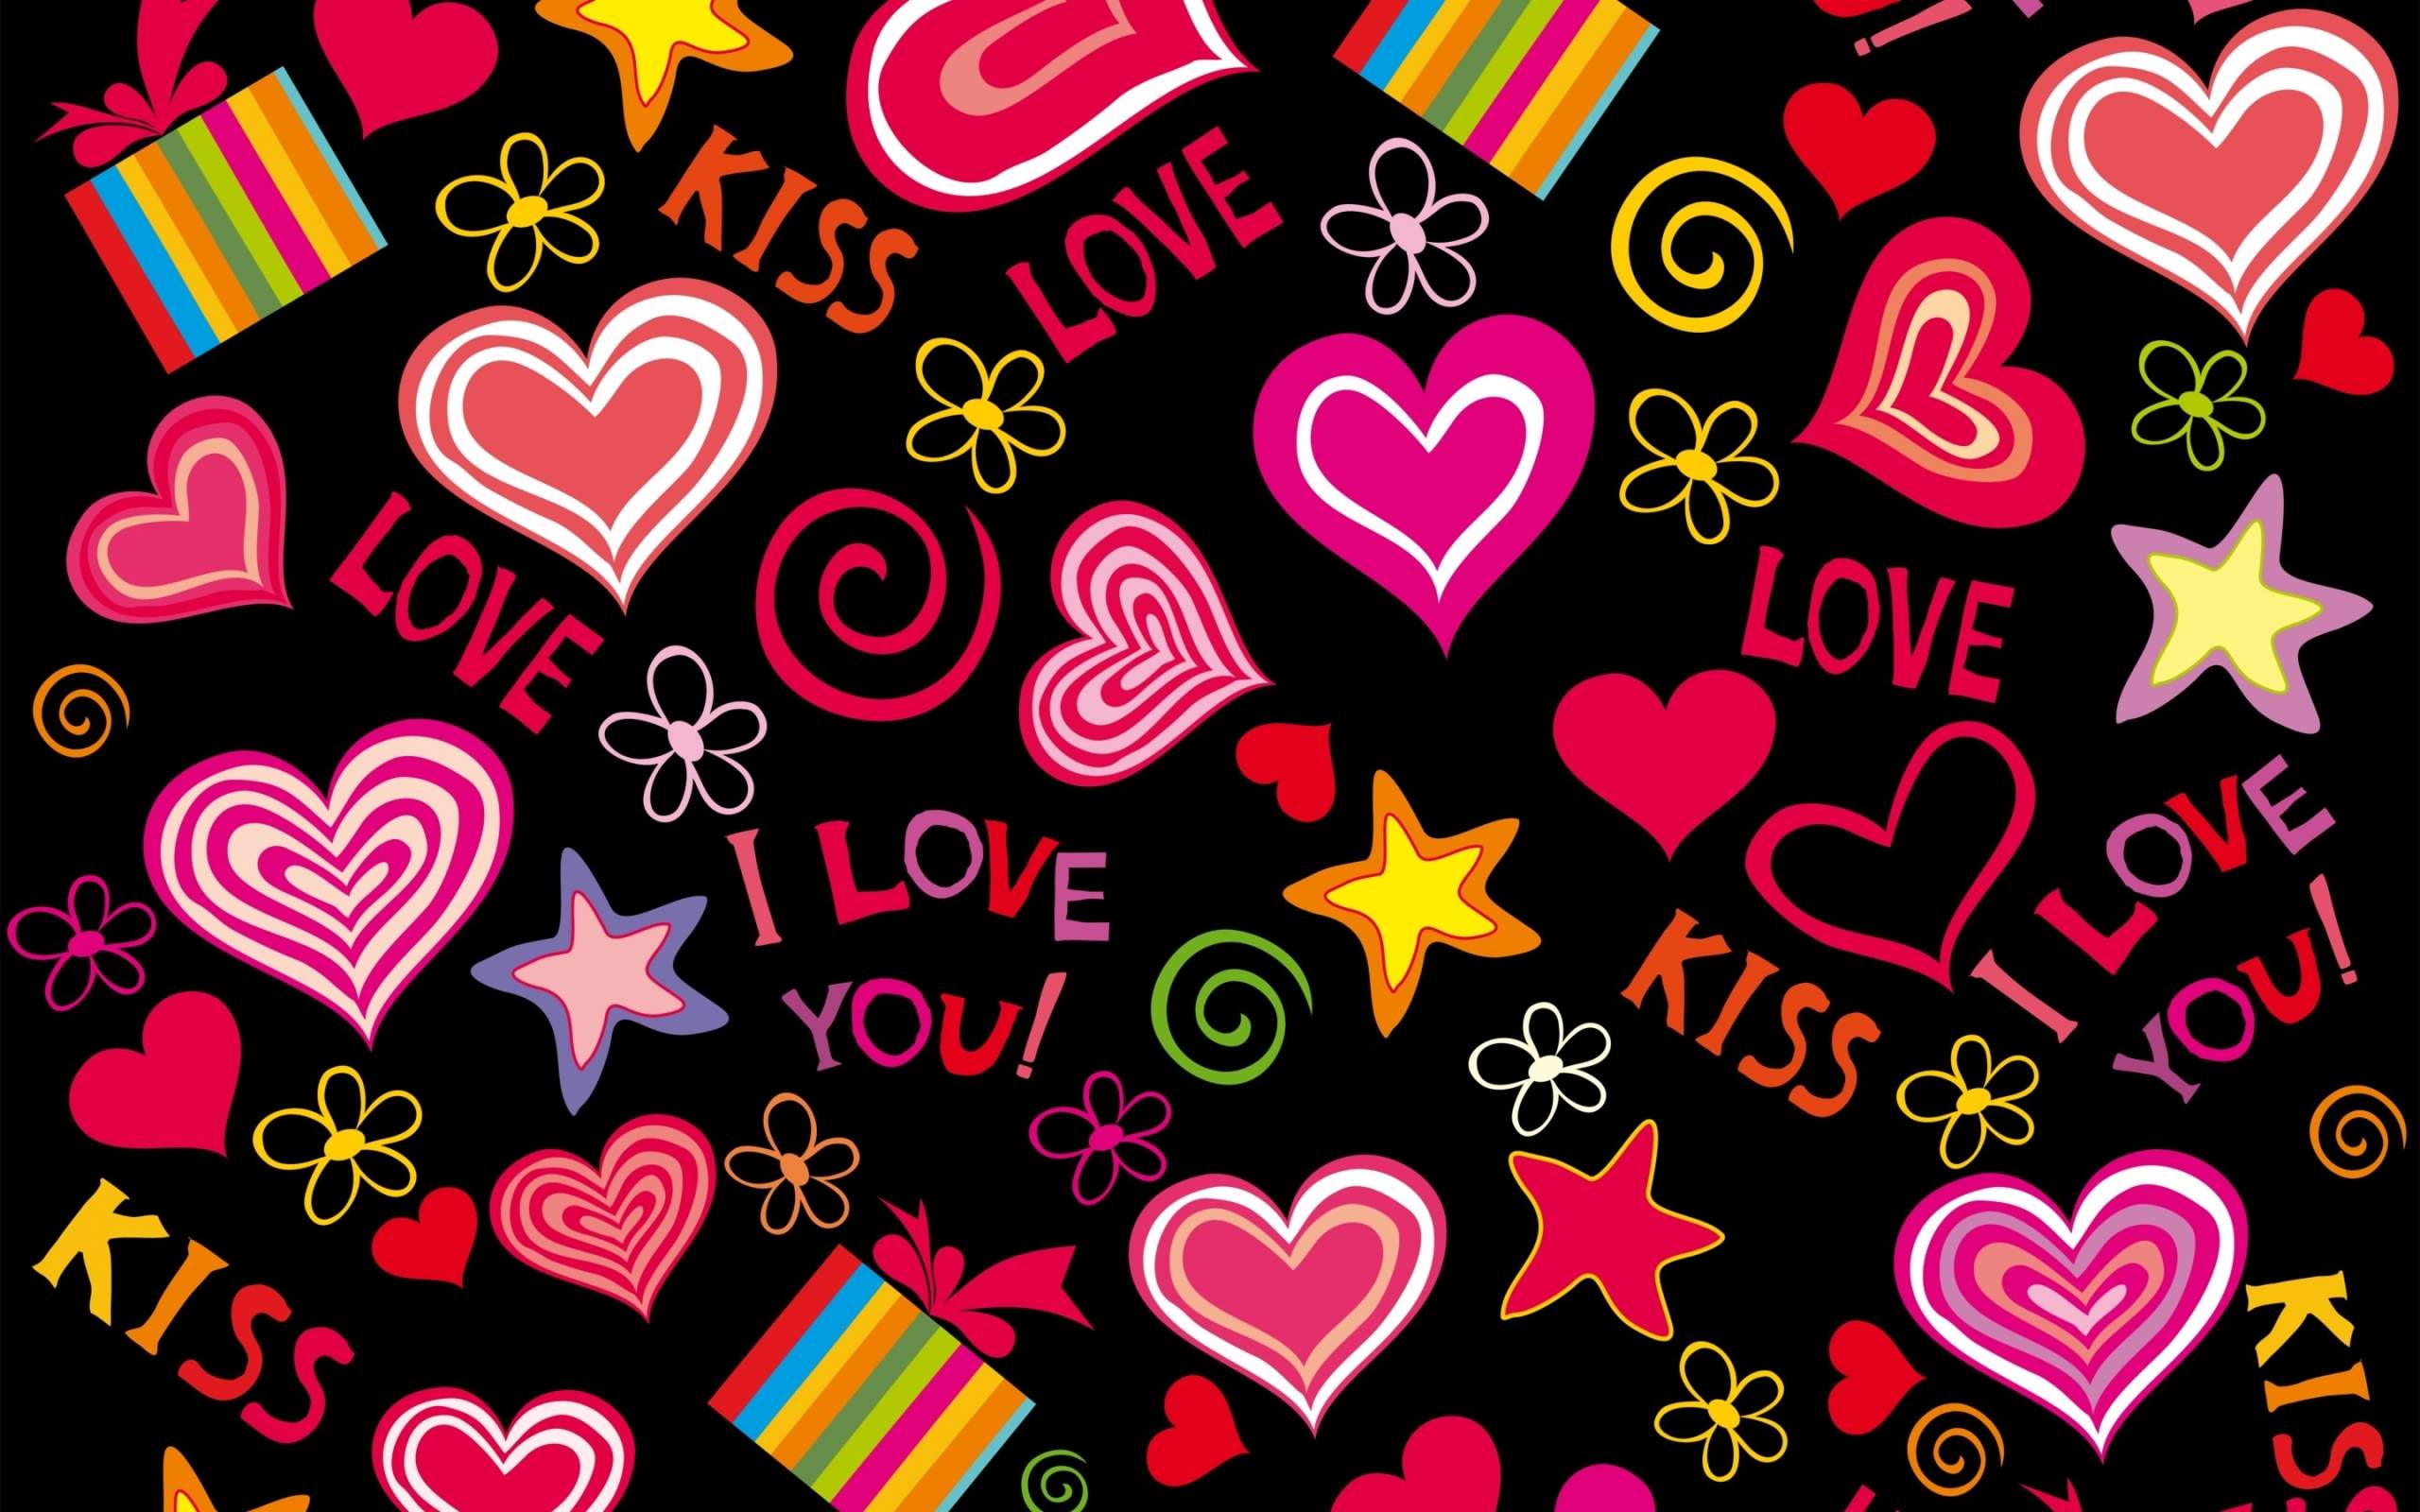 Download Kiss and Love Background Wallpaper for desktop, mobile